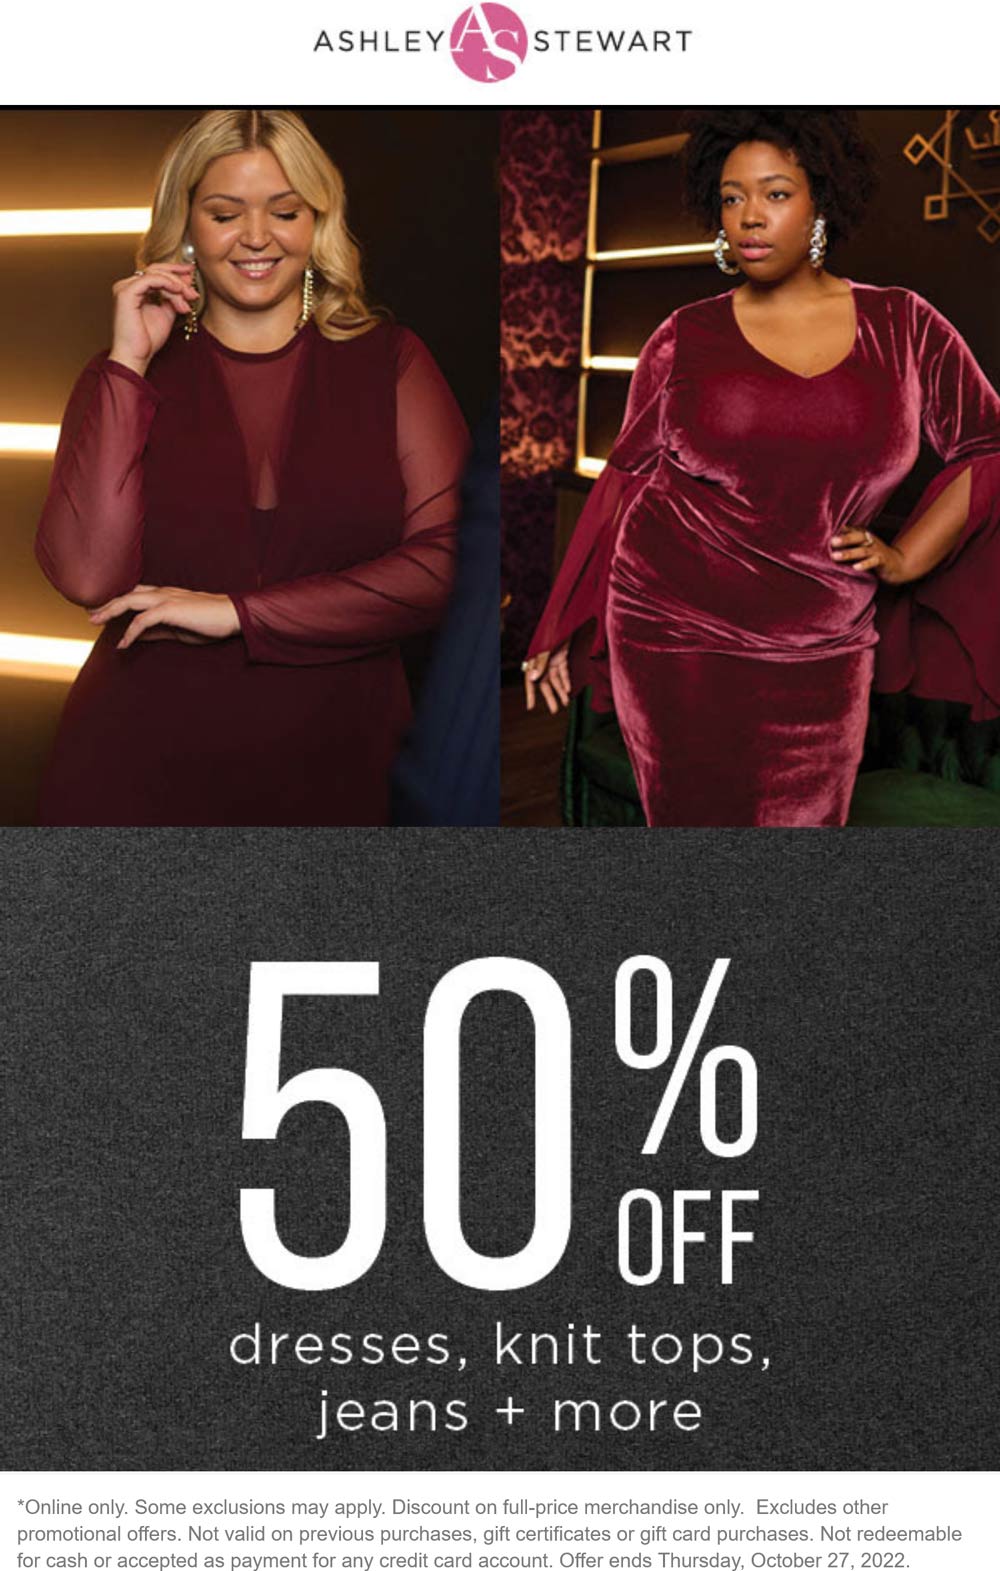 Ashley Stewart stores Coupon  50% off dresses tops & jeans today online at Ashley Stewart #ashleystewart 